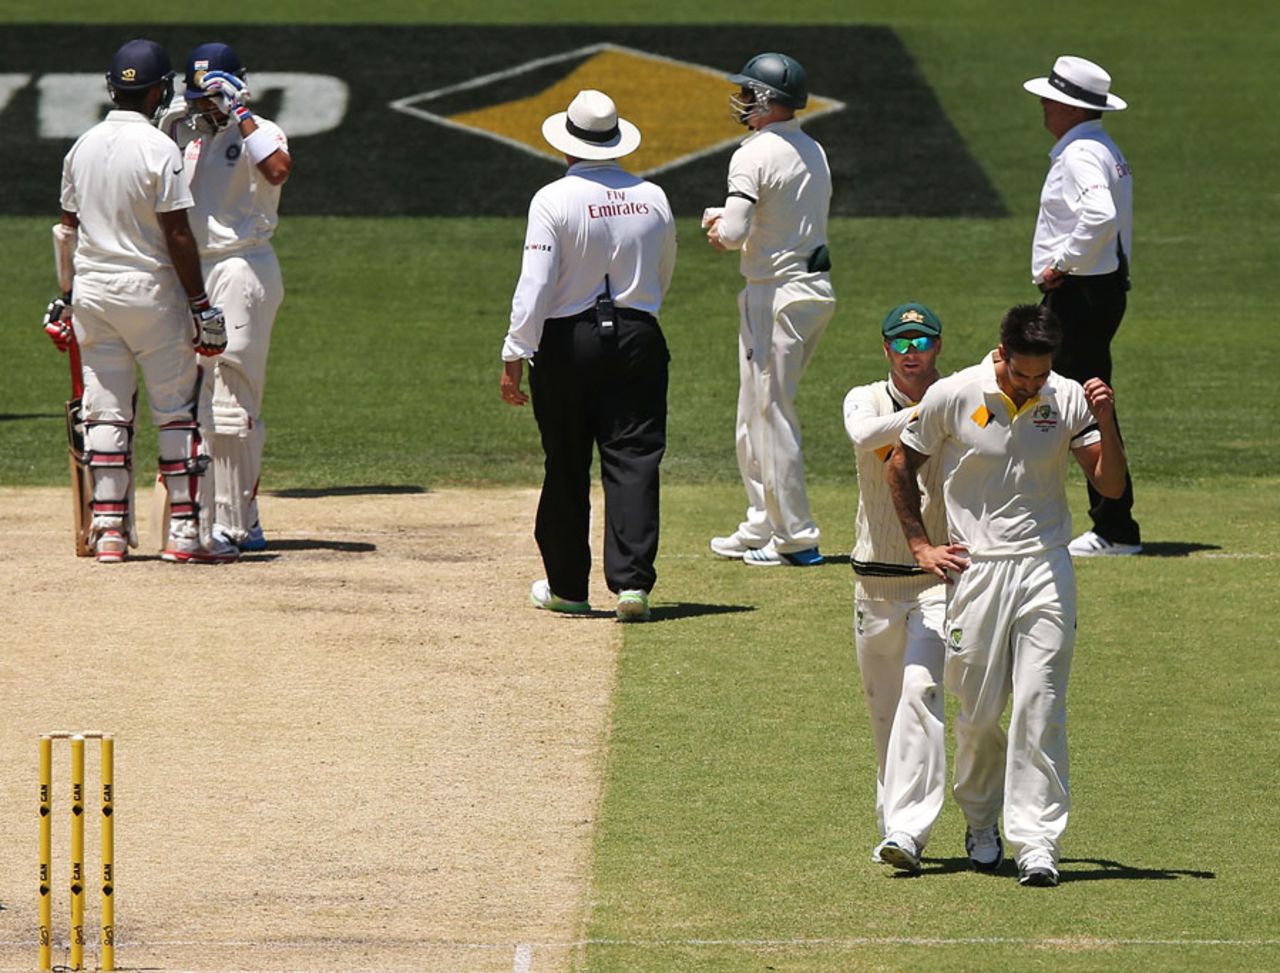 Cheteshwar Pujara and the umpires check on Kohli after a Mitchell Johnson bouncer while Michael Clarke has a word of support for Johnson, Australia v India, 1st Test, Adelaide, 3rd day, December 11, 2014